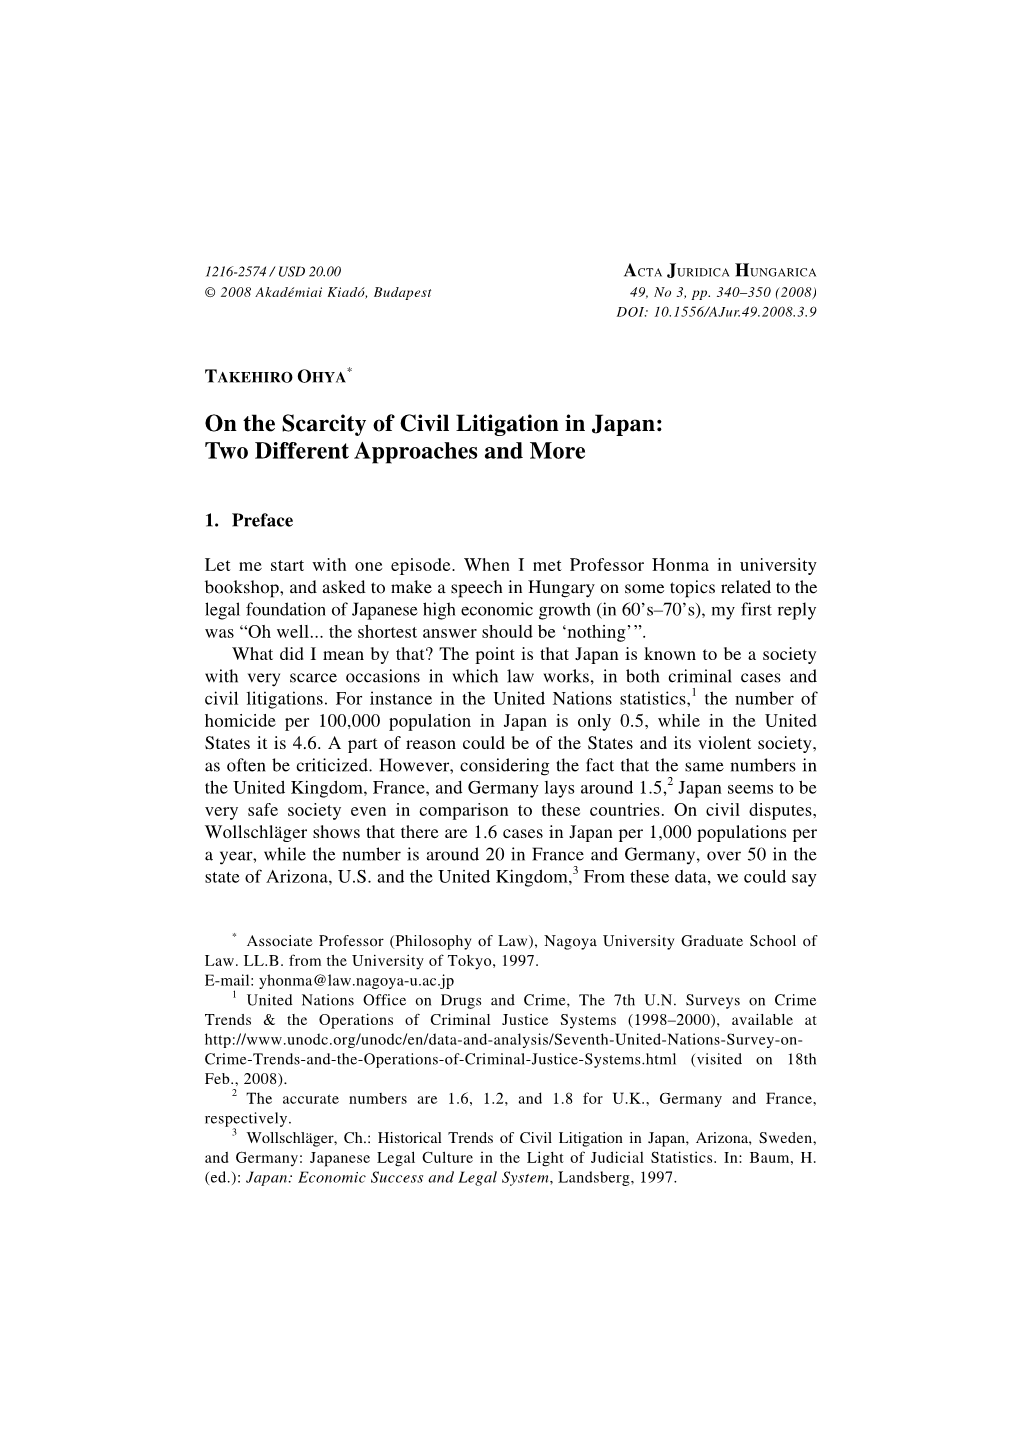 On the Scarcity of Civil Litigation in Japan: Two Different Approaches and More